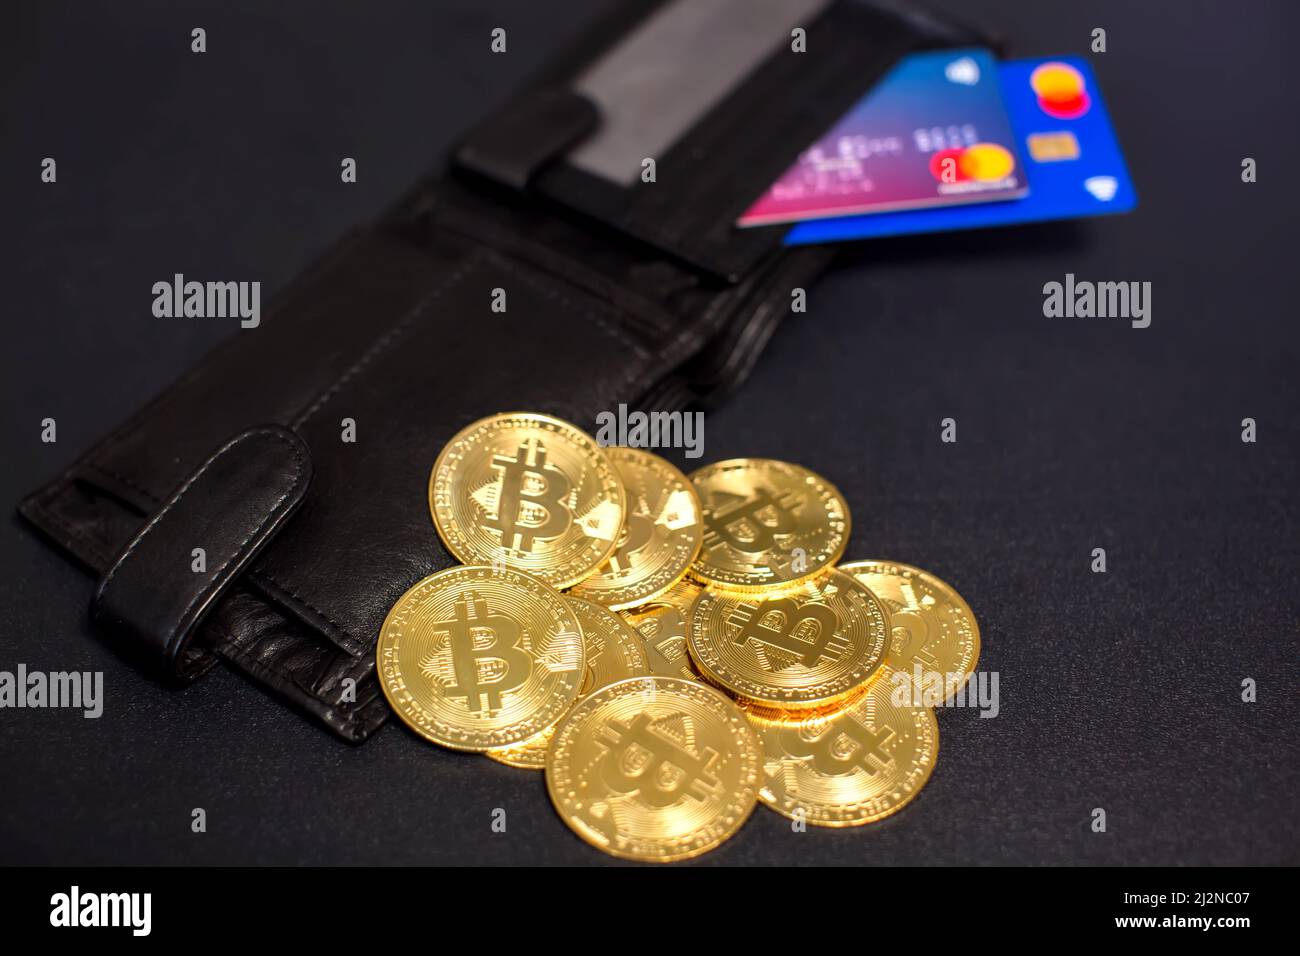 Bitcoin coins and credit cards in a wallet on the blackboard background Stock Photo